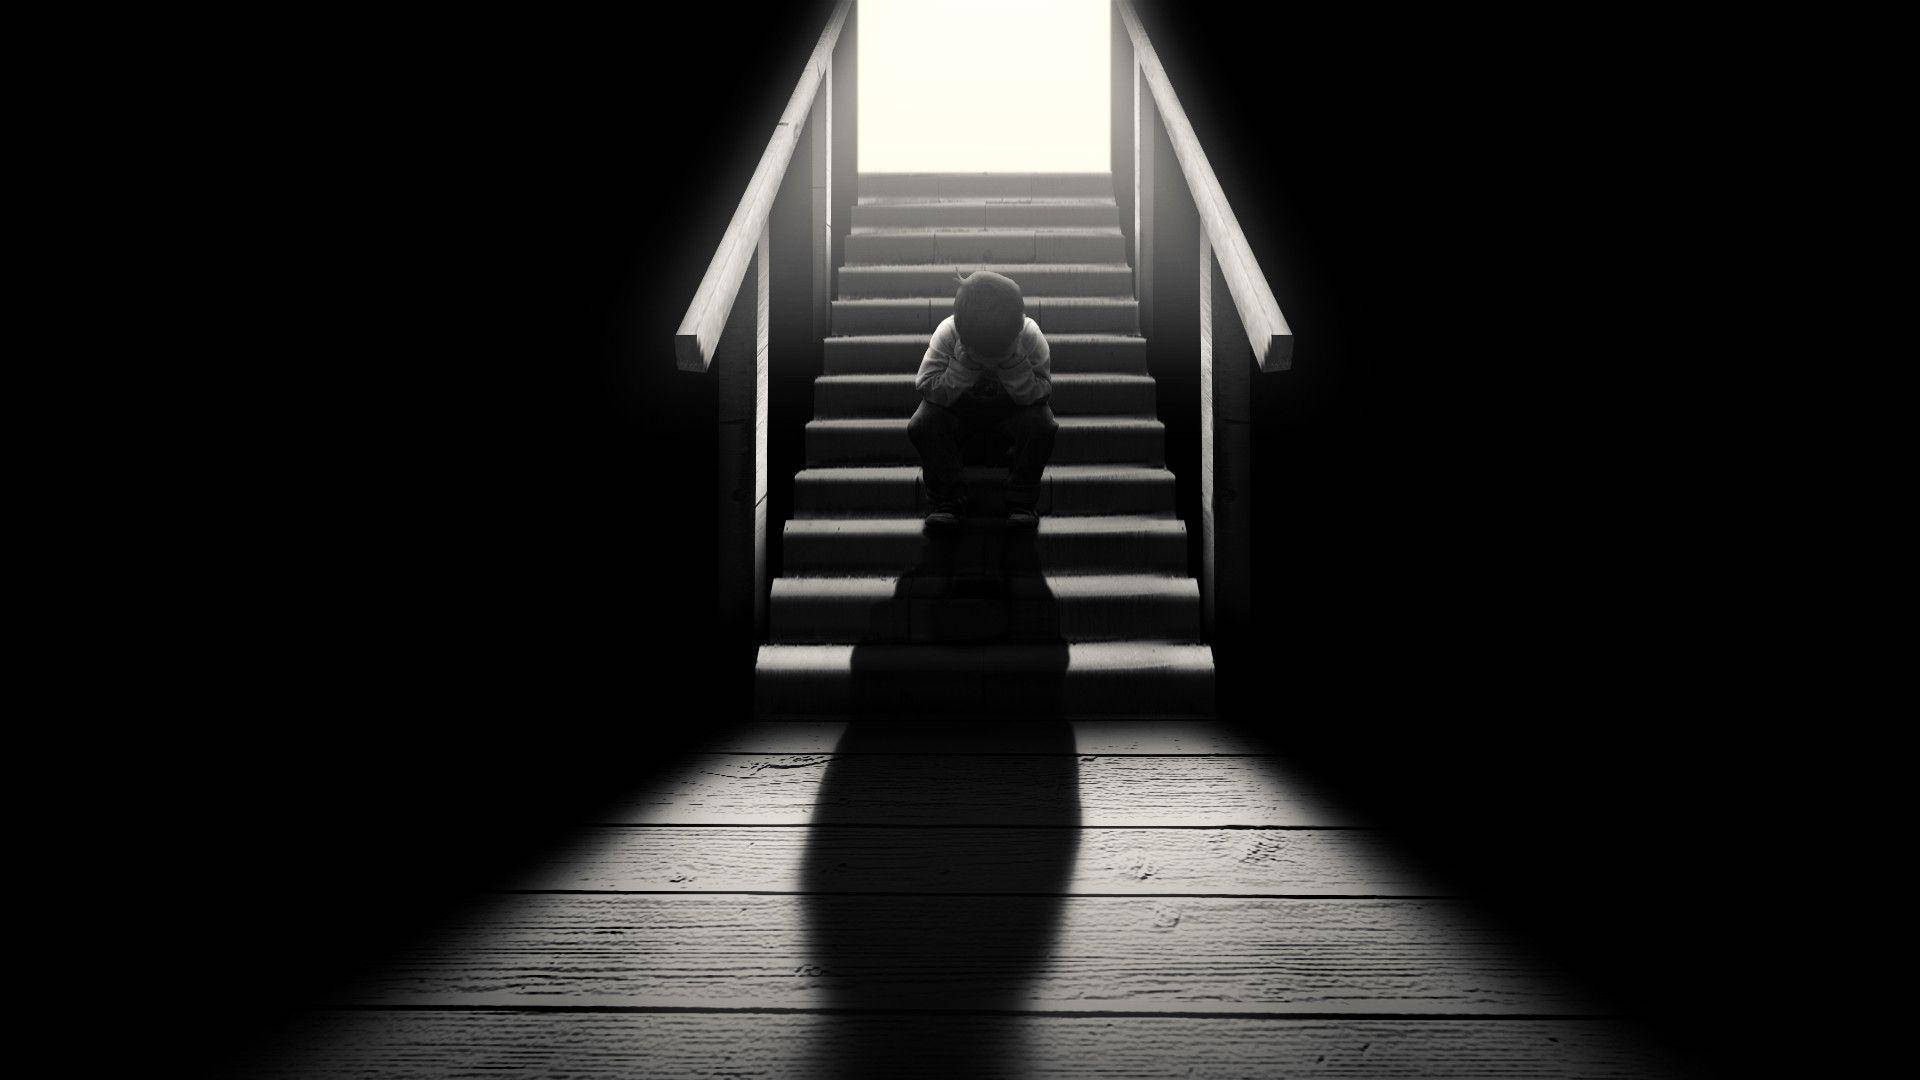 Dark Loneliness: A Solitary Figure On A Staircase